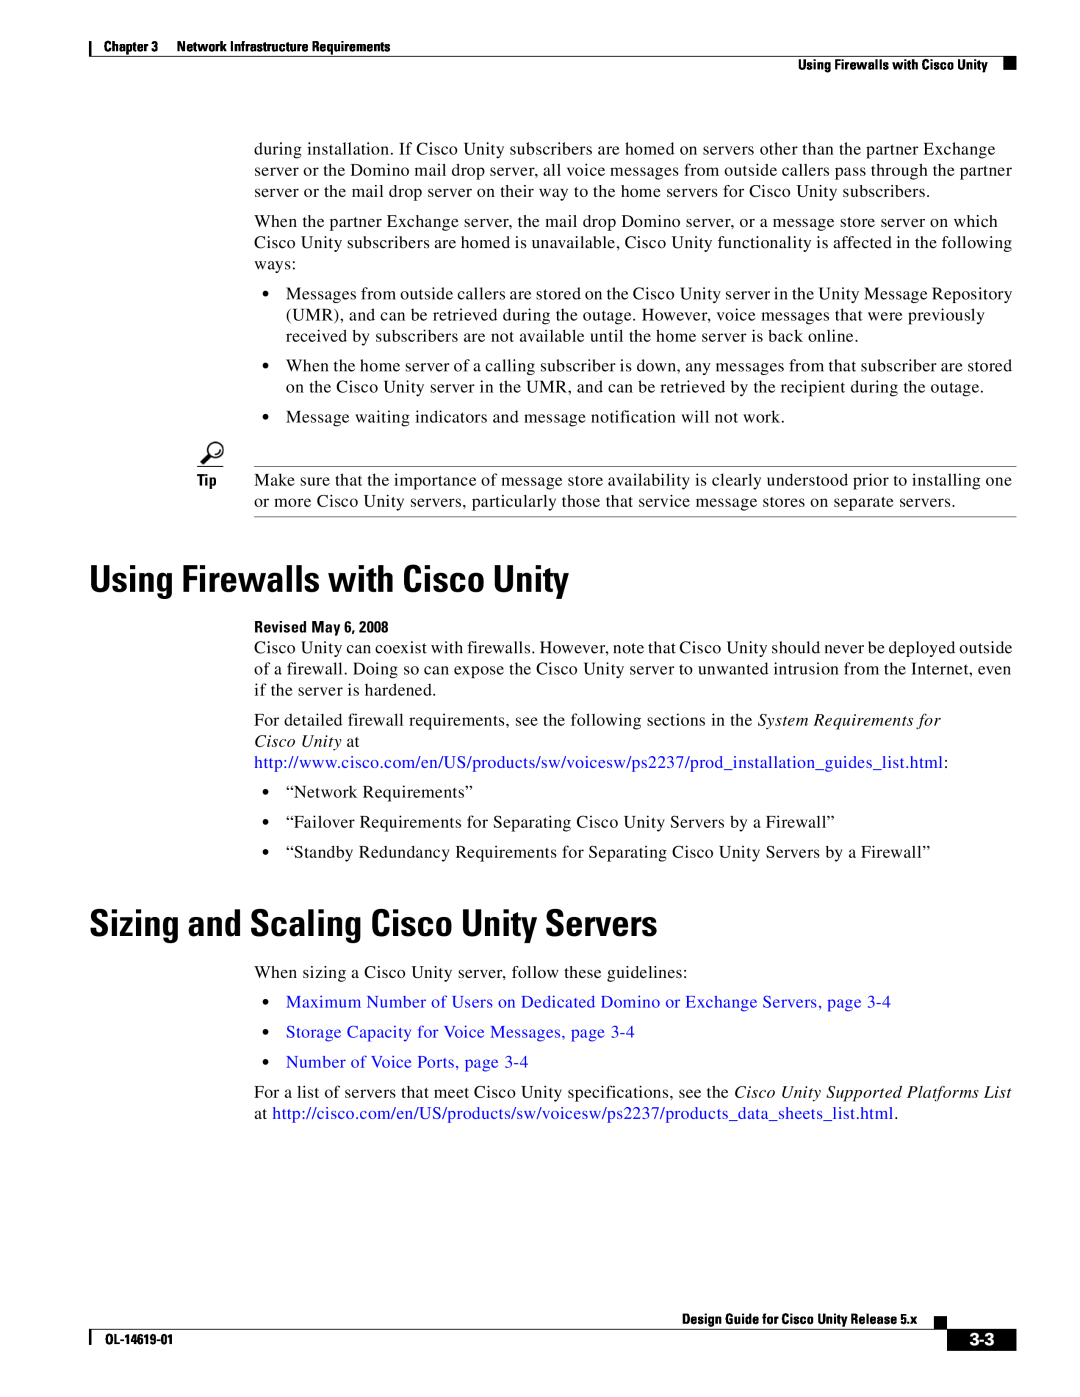 Cisco Systems OL-14619-01 manual Using Firewalls with Cisco Unity, Sizing and Scaling Cisco Unity Servers 